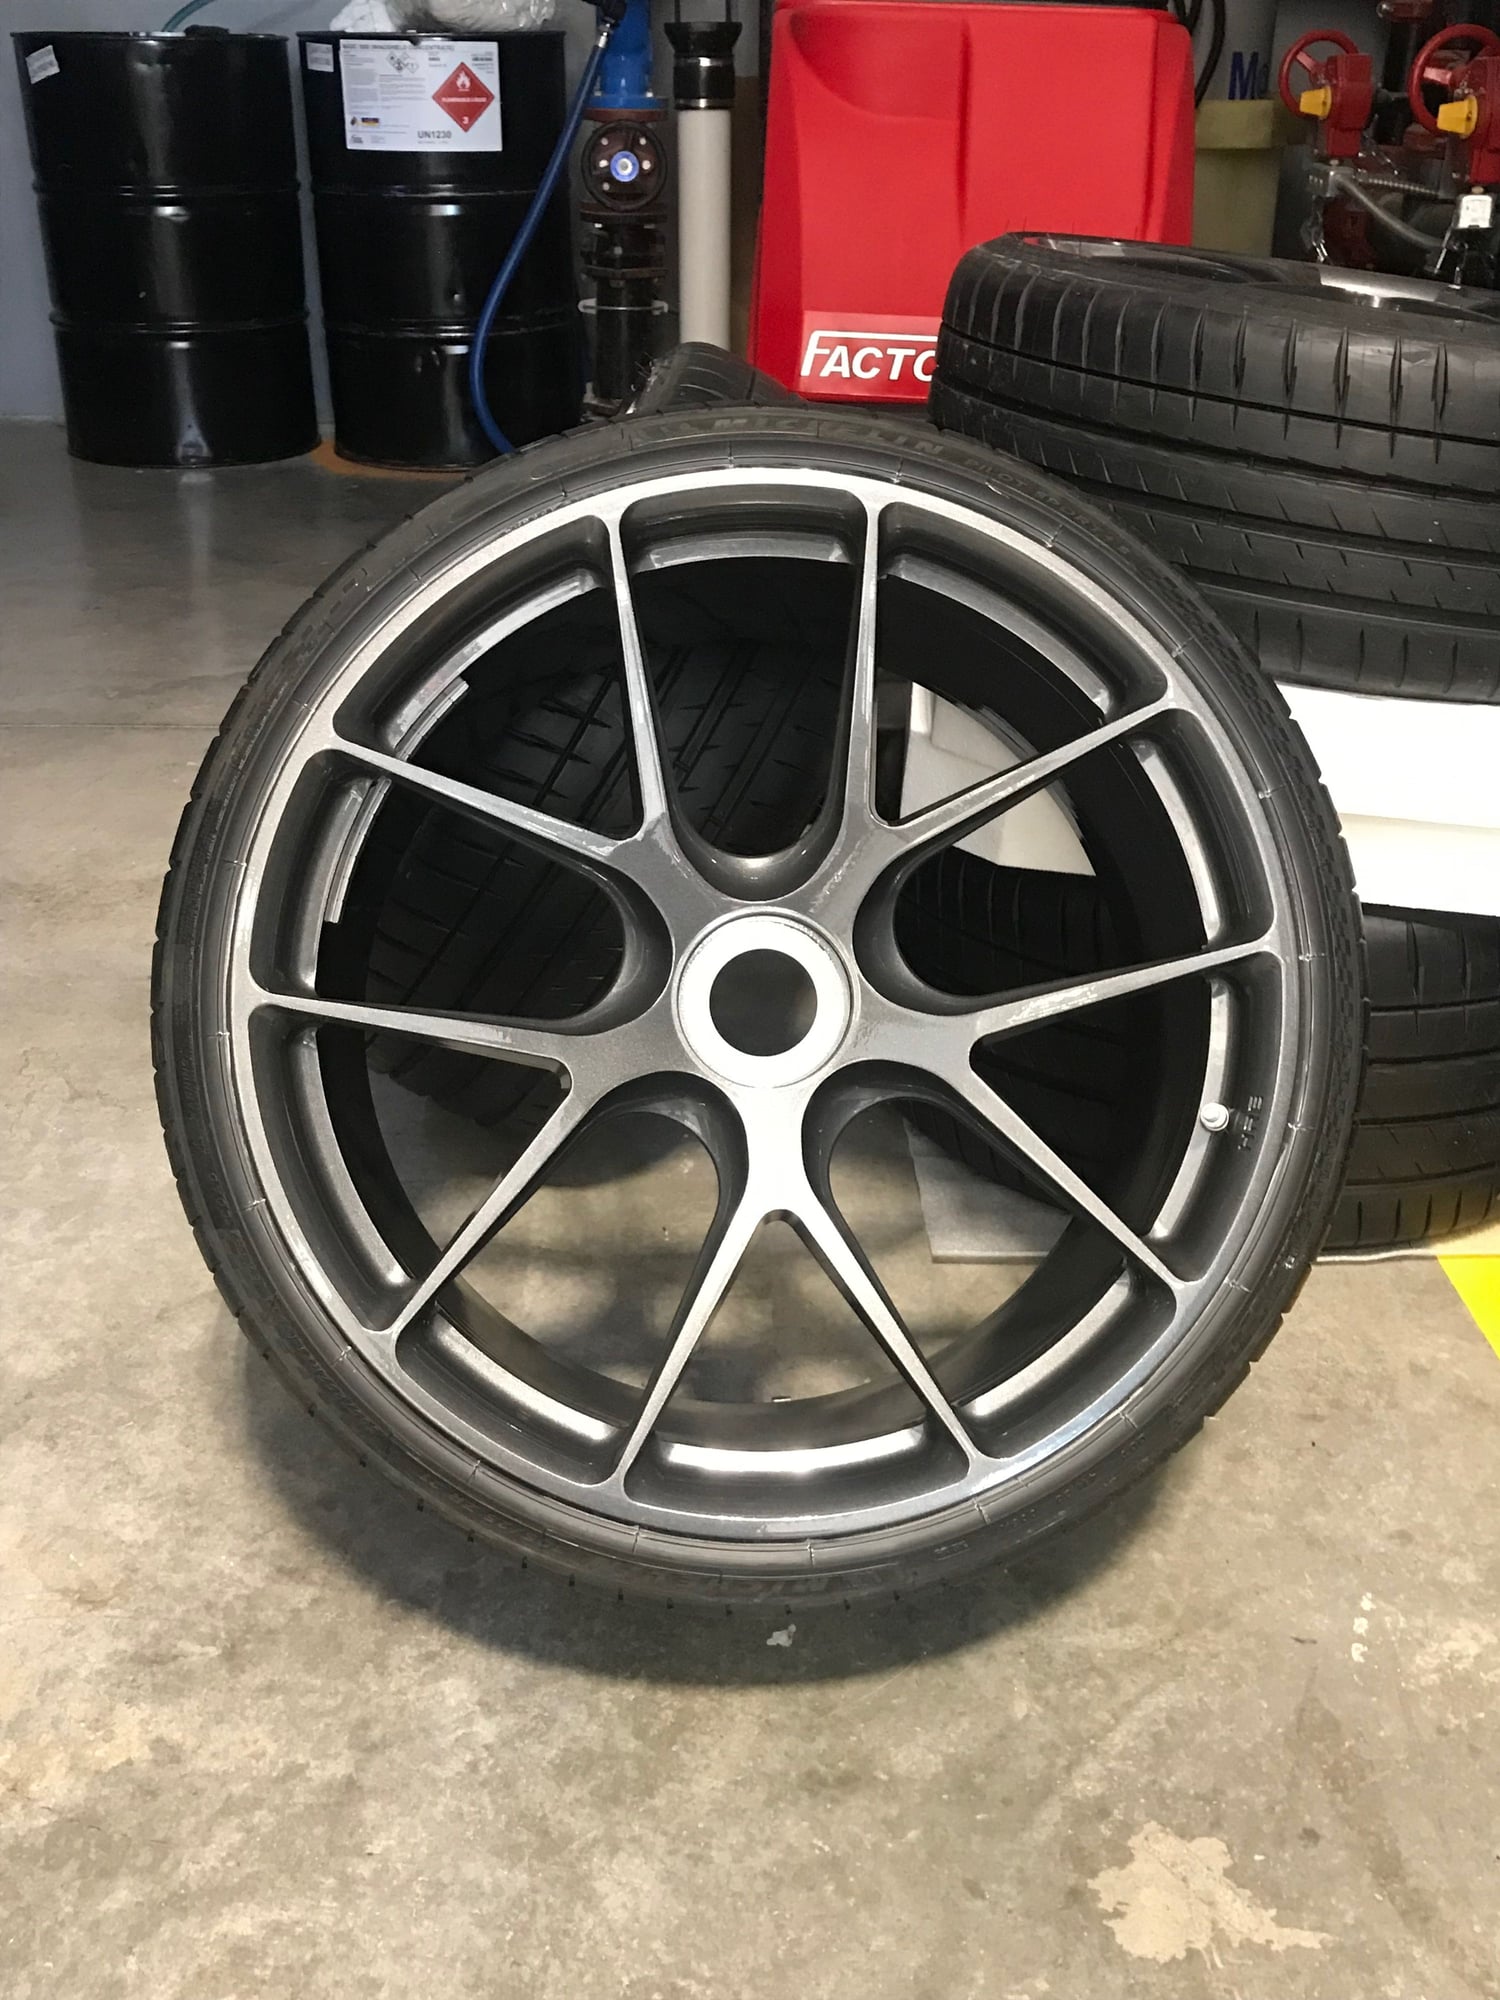 Wheels and Tires/Axles - New HRE 21" wheels - New - All Years Porsche 911 - Overland Park, KS 66213, United States